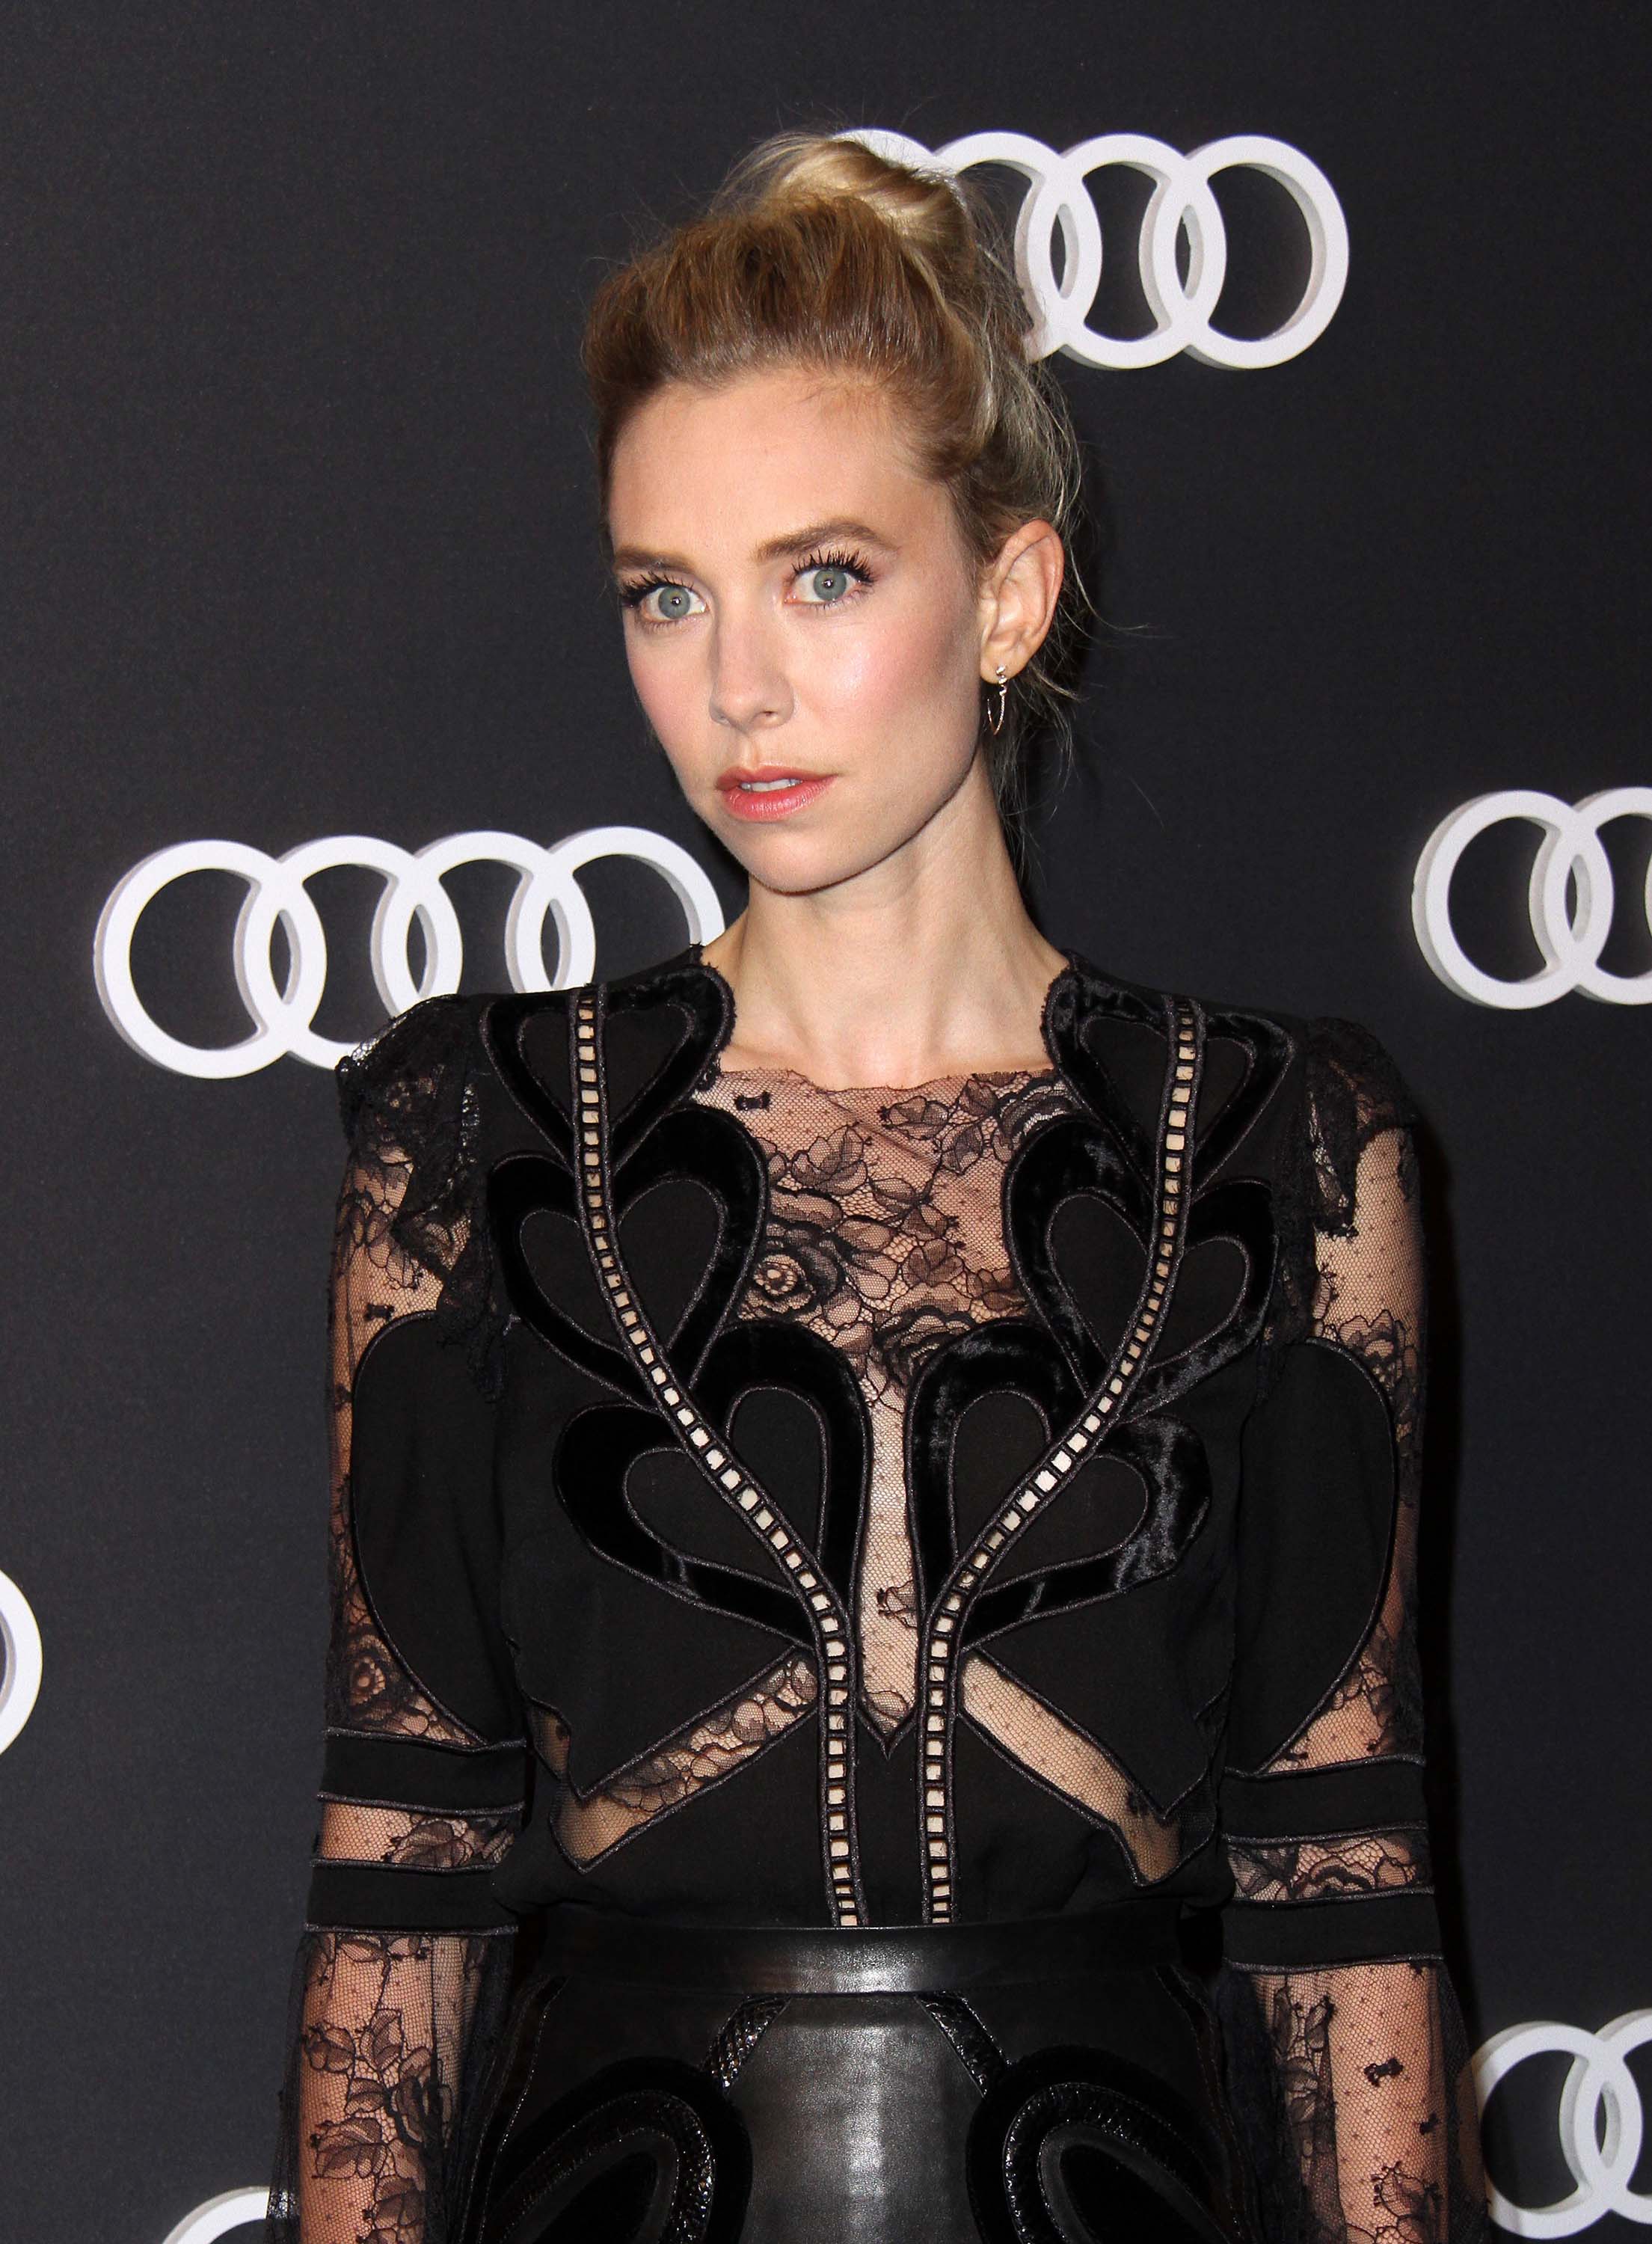 Vanessa Kirby attends Audi Emmy Party